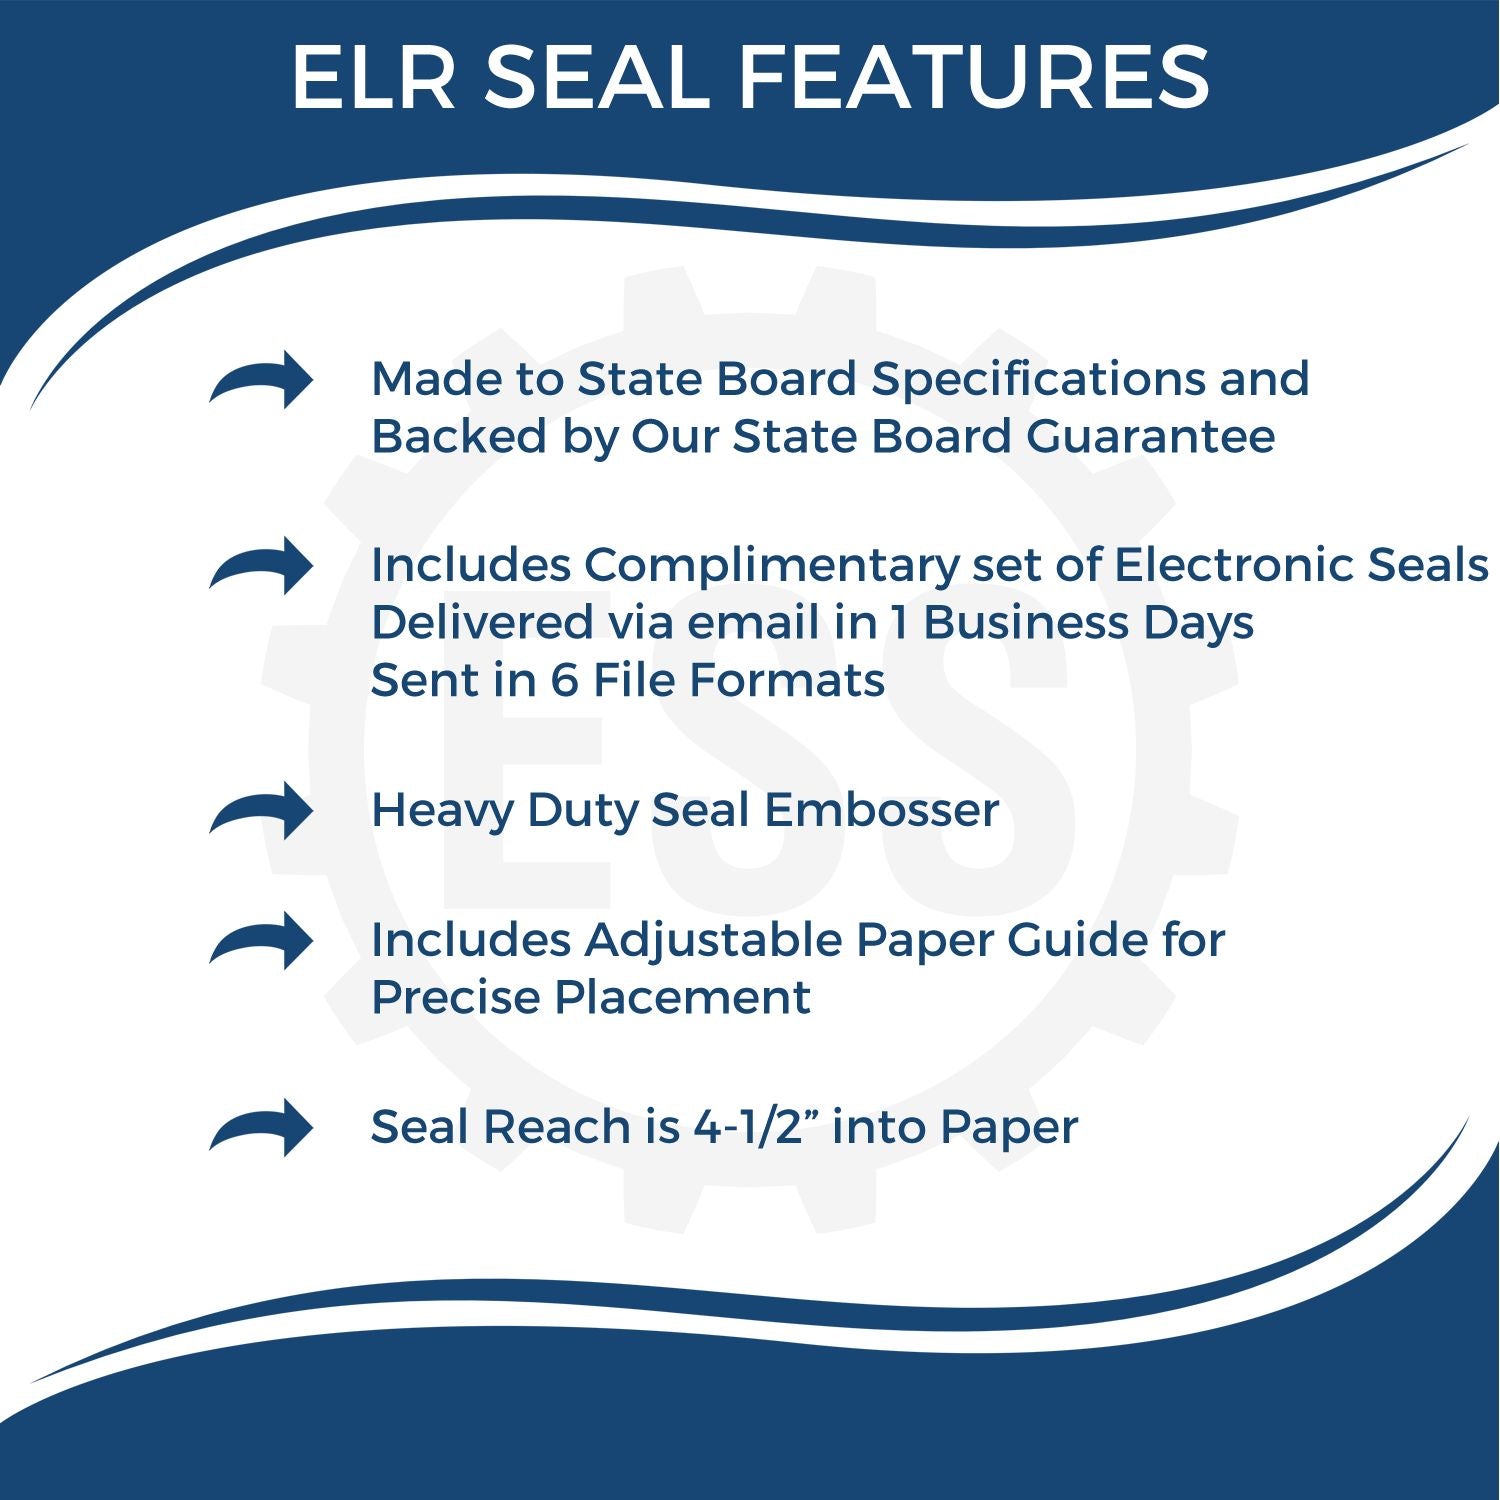 The main image for the State of Illinois Extended Long Reach Engineer Seal depicting a sample of the imprint and electronic files